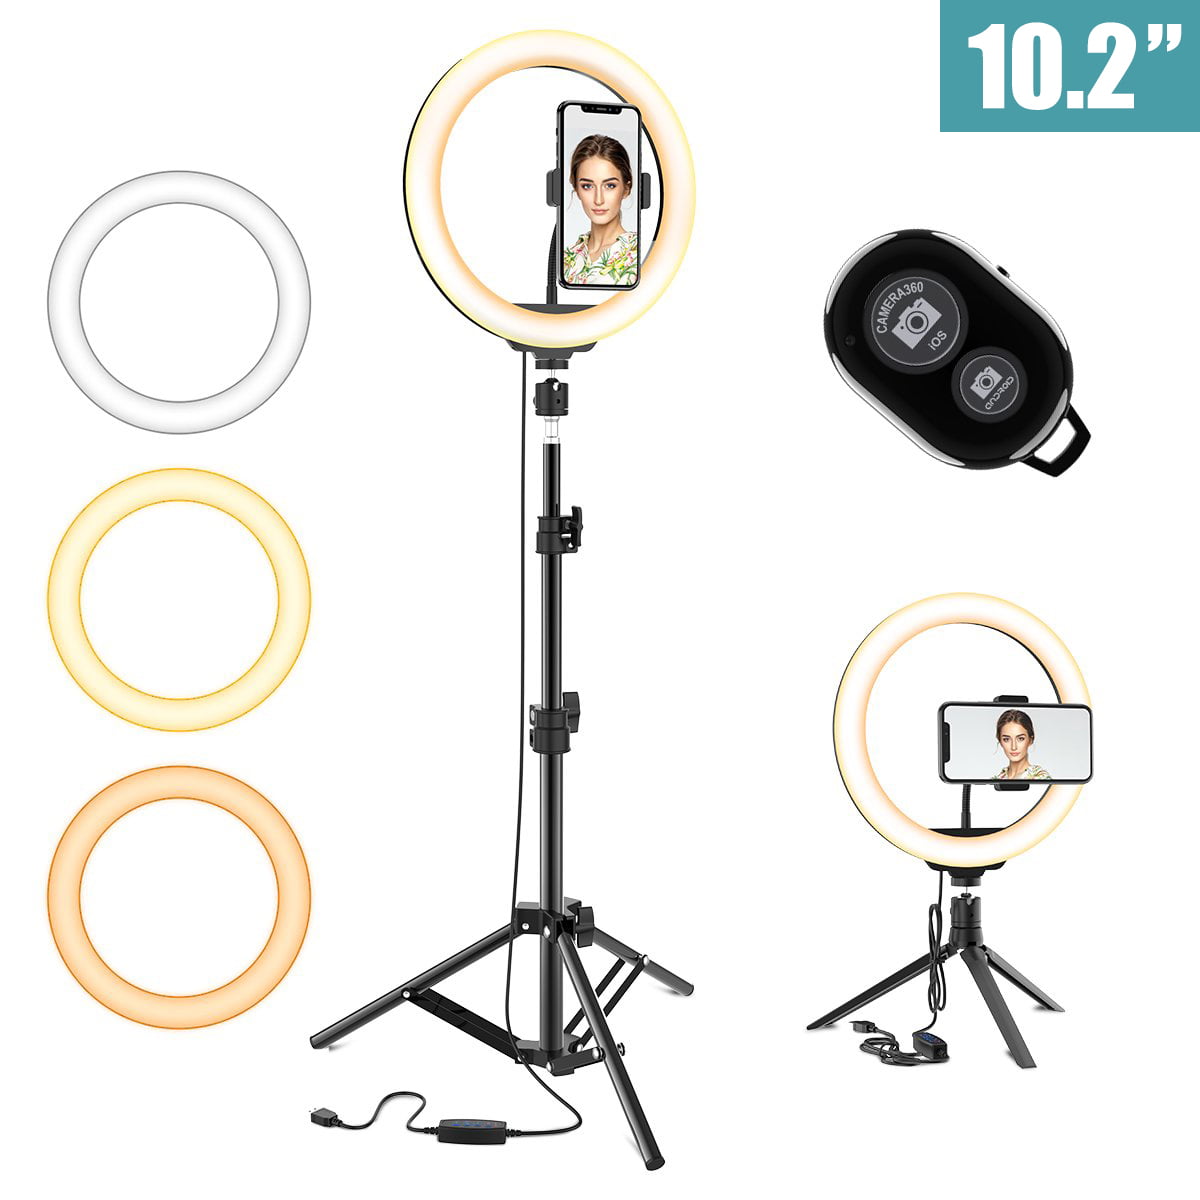 18 Inch LED Ring Light Kit with Tripod Stand & Phone Holder for Meeting Makeup Photography Selfie Ringlight 3 Modes 11 Brightness Levels for Video Recording TikTok YouTube Live Stream